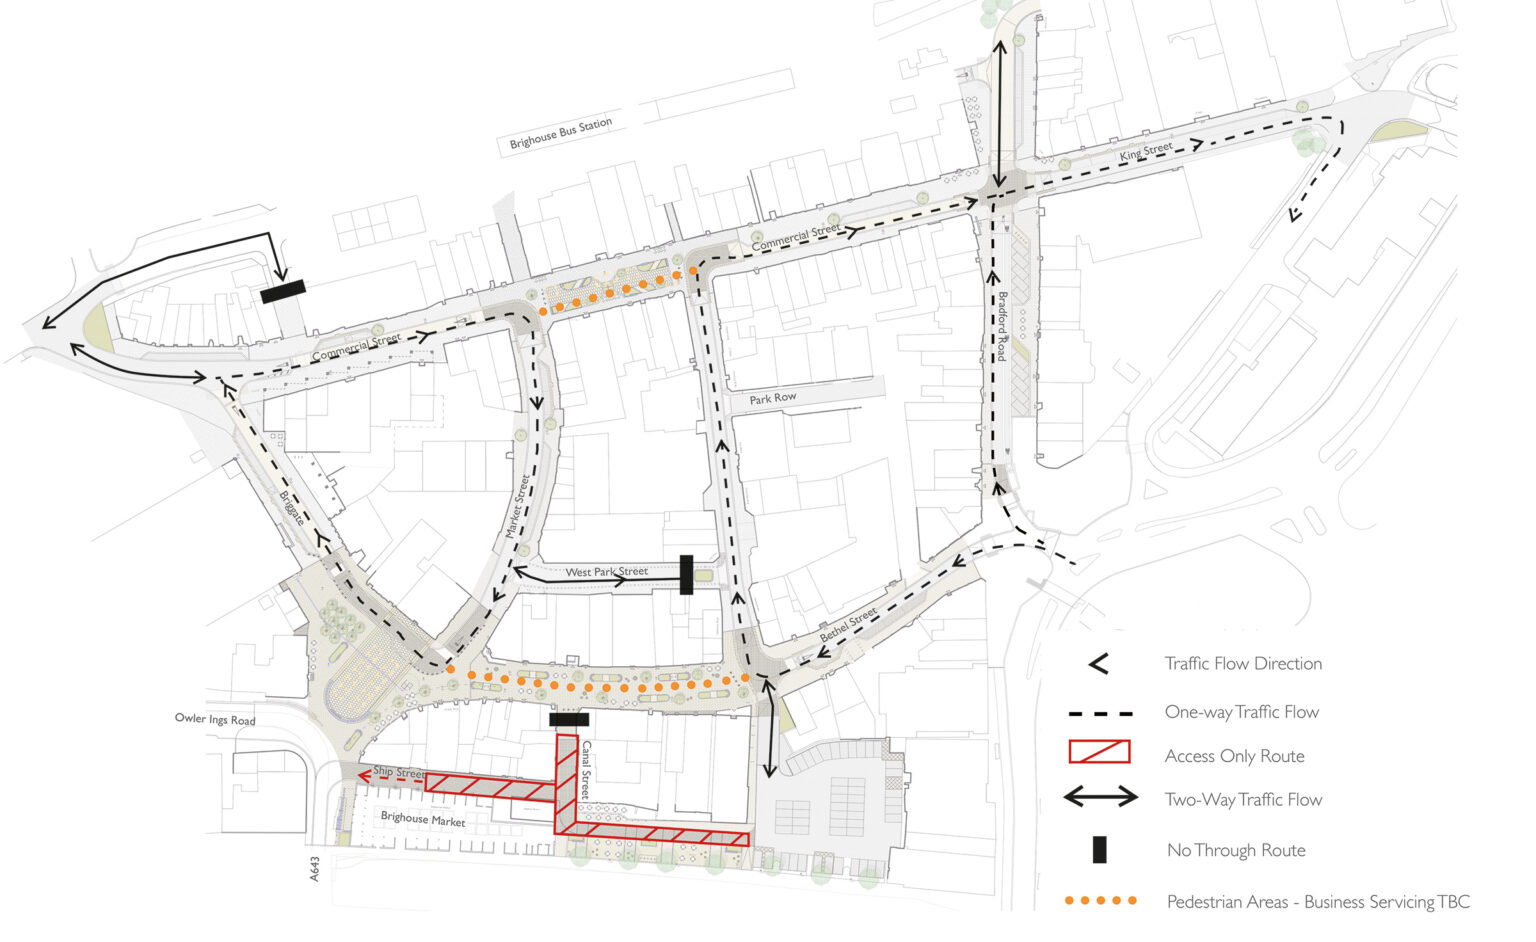 Map view of Brighouse shows access only routes on Ship Street and Canal Street, a no through route on West Park Street, and areas prioritising pedestrians on Bethel Street and Commercial Street. 